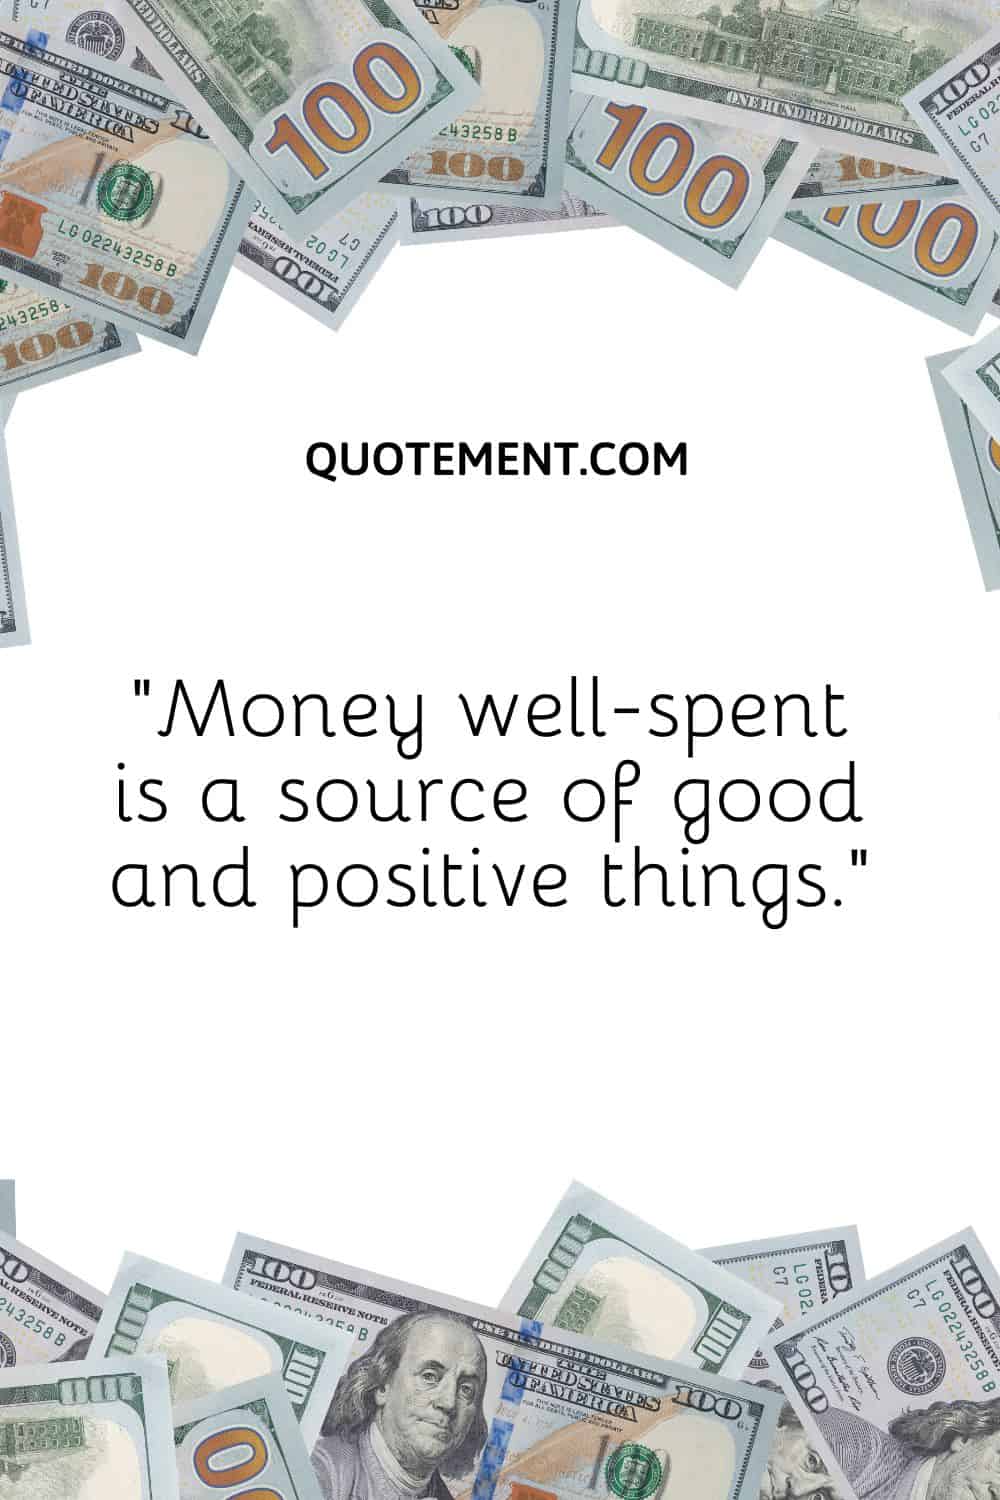 “Money well-spent is a source of good and positive things.”